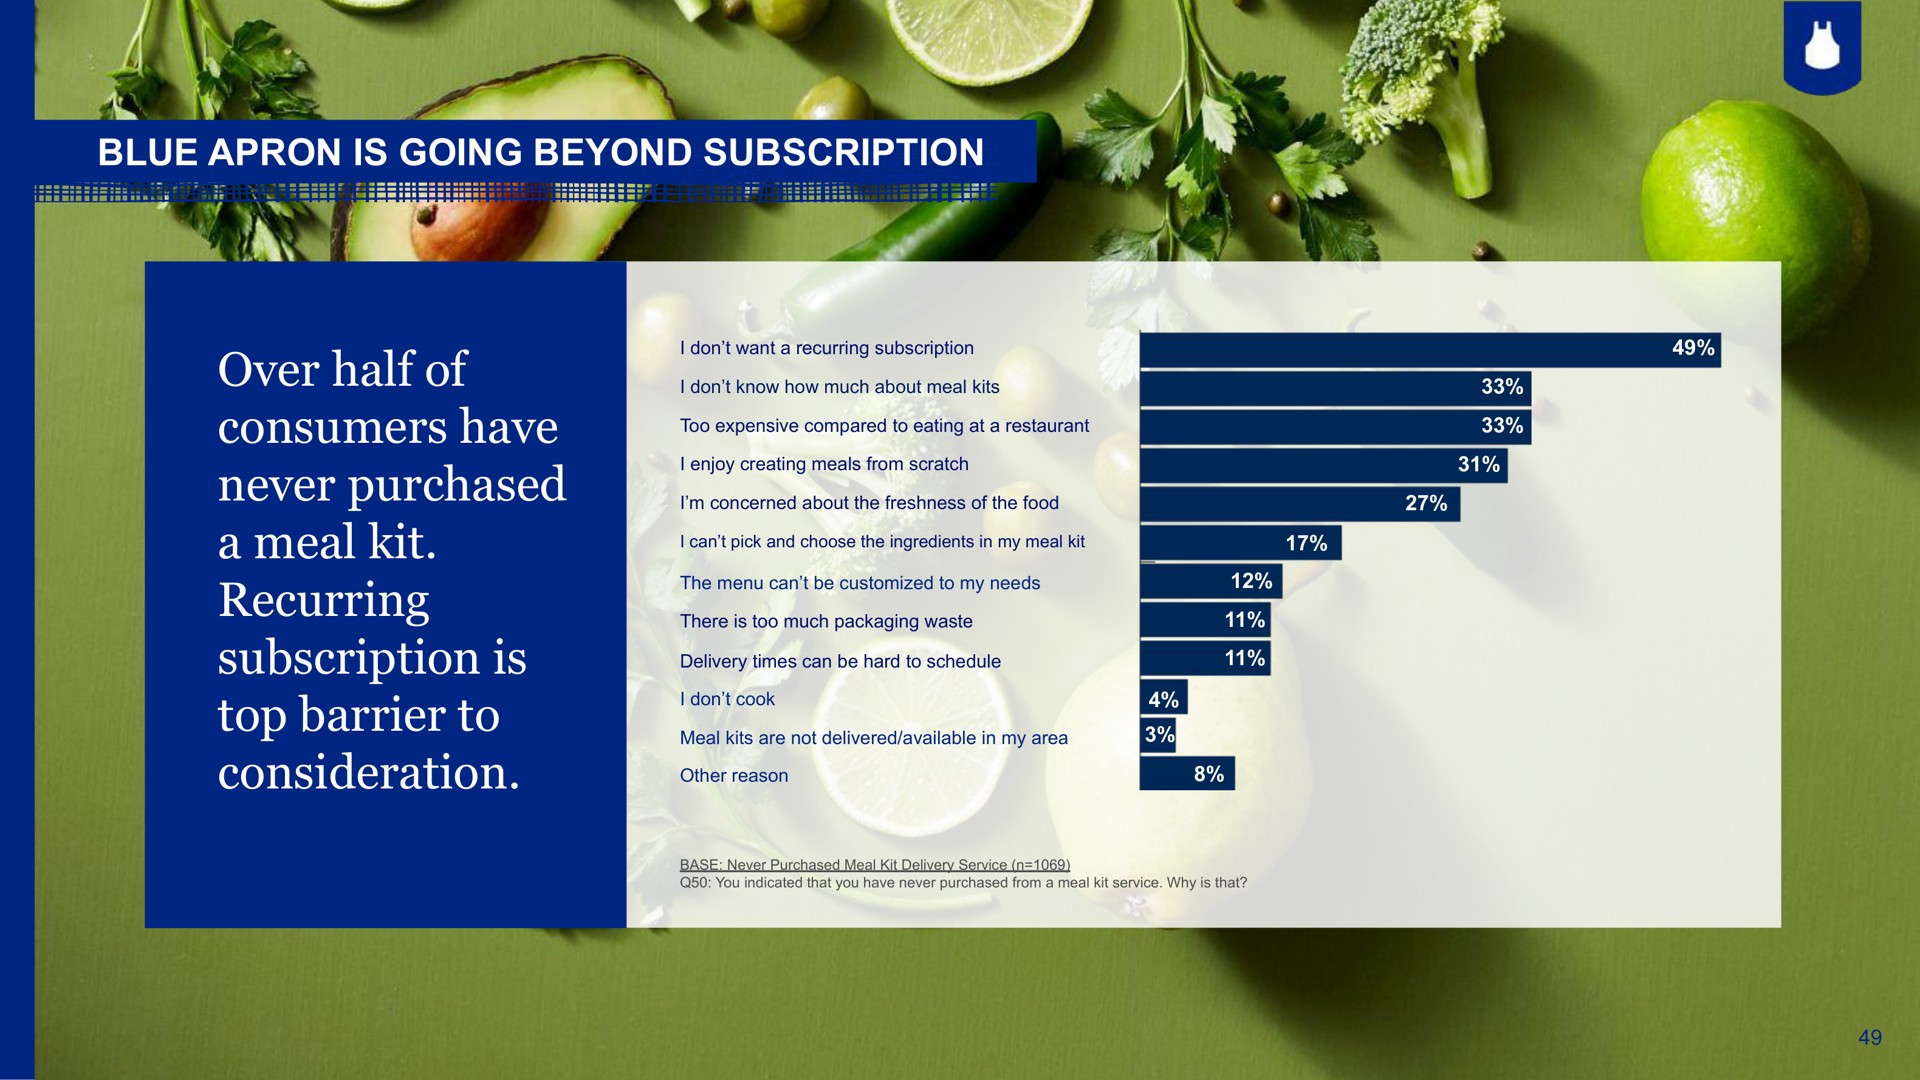 blue apron is going beyond subscription over half of consumers have never purchased a meal kit recurring subscription is top barrier to consideration | Blue Apron